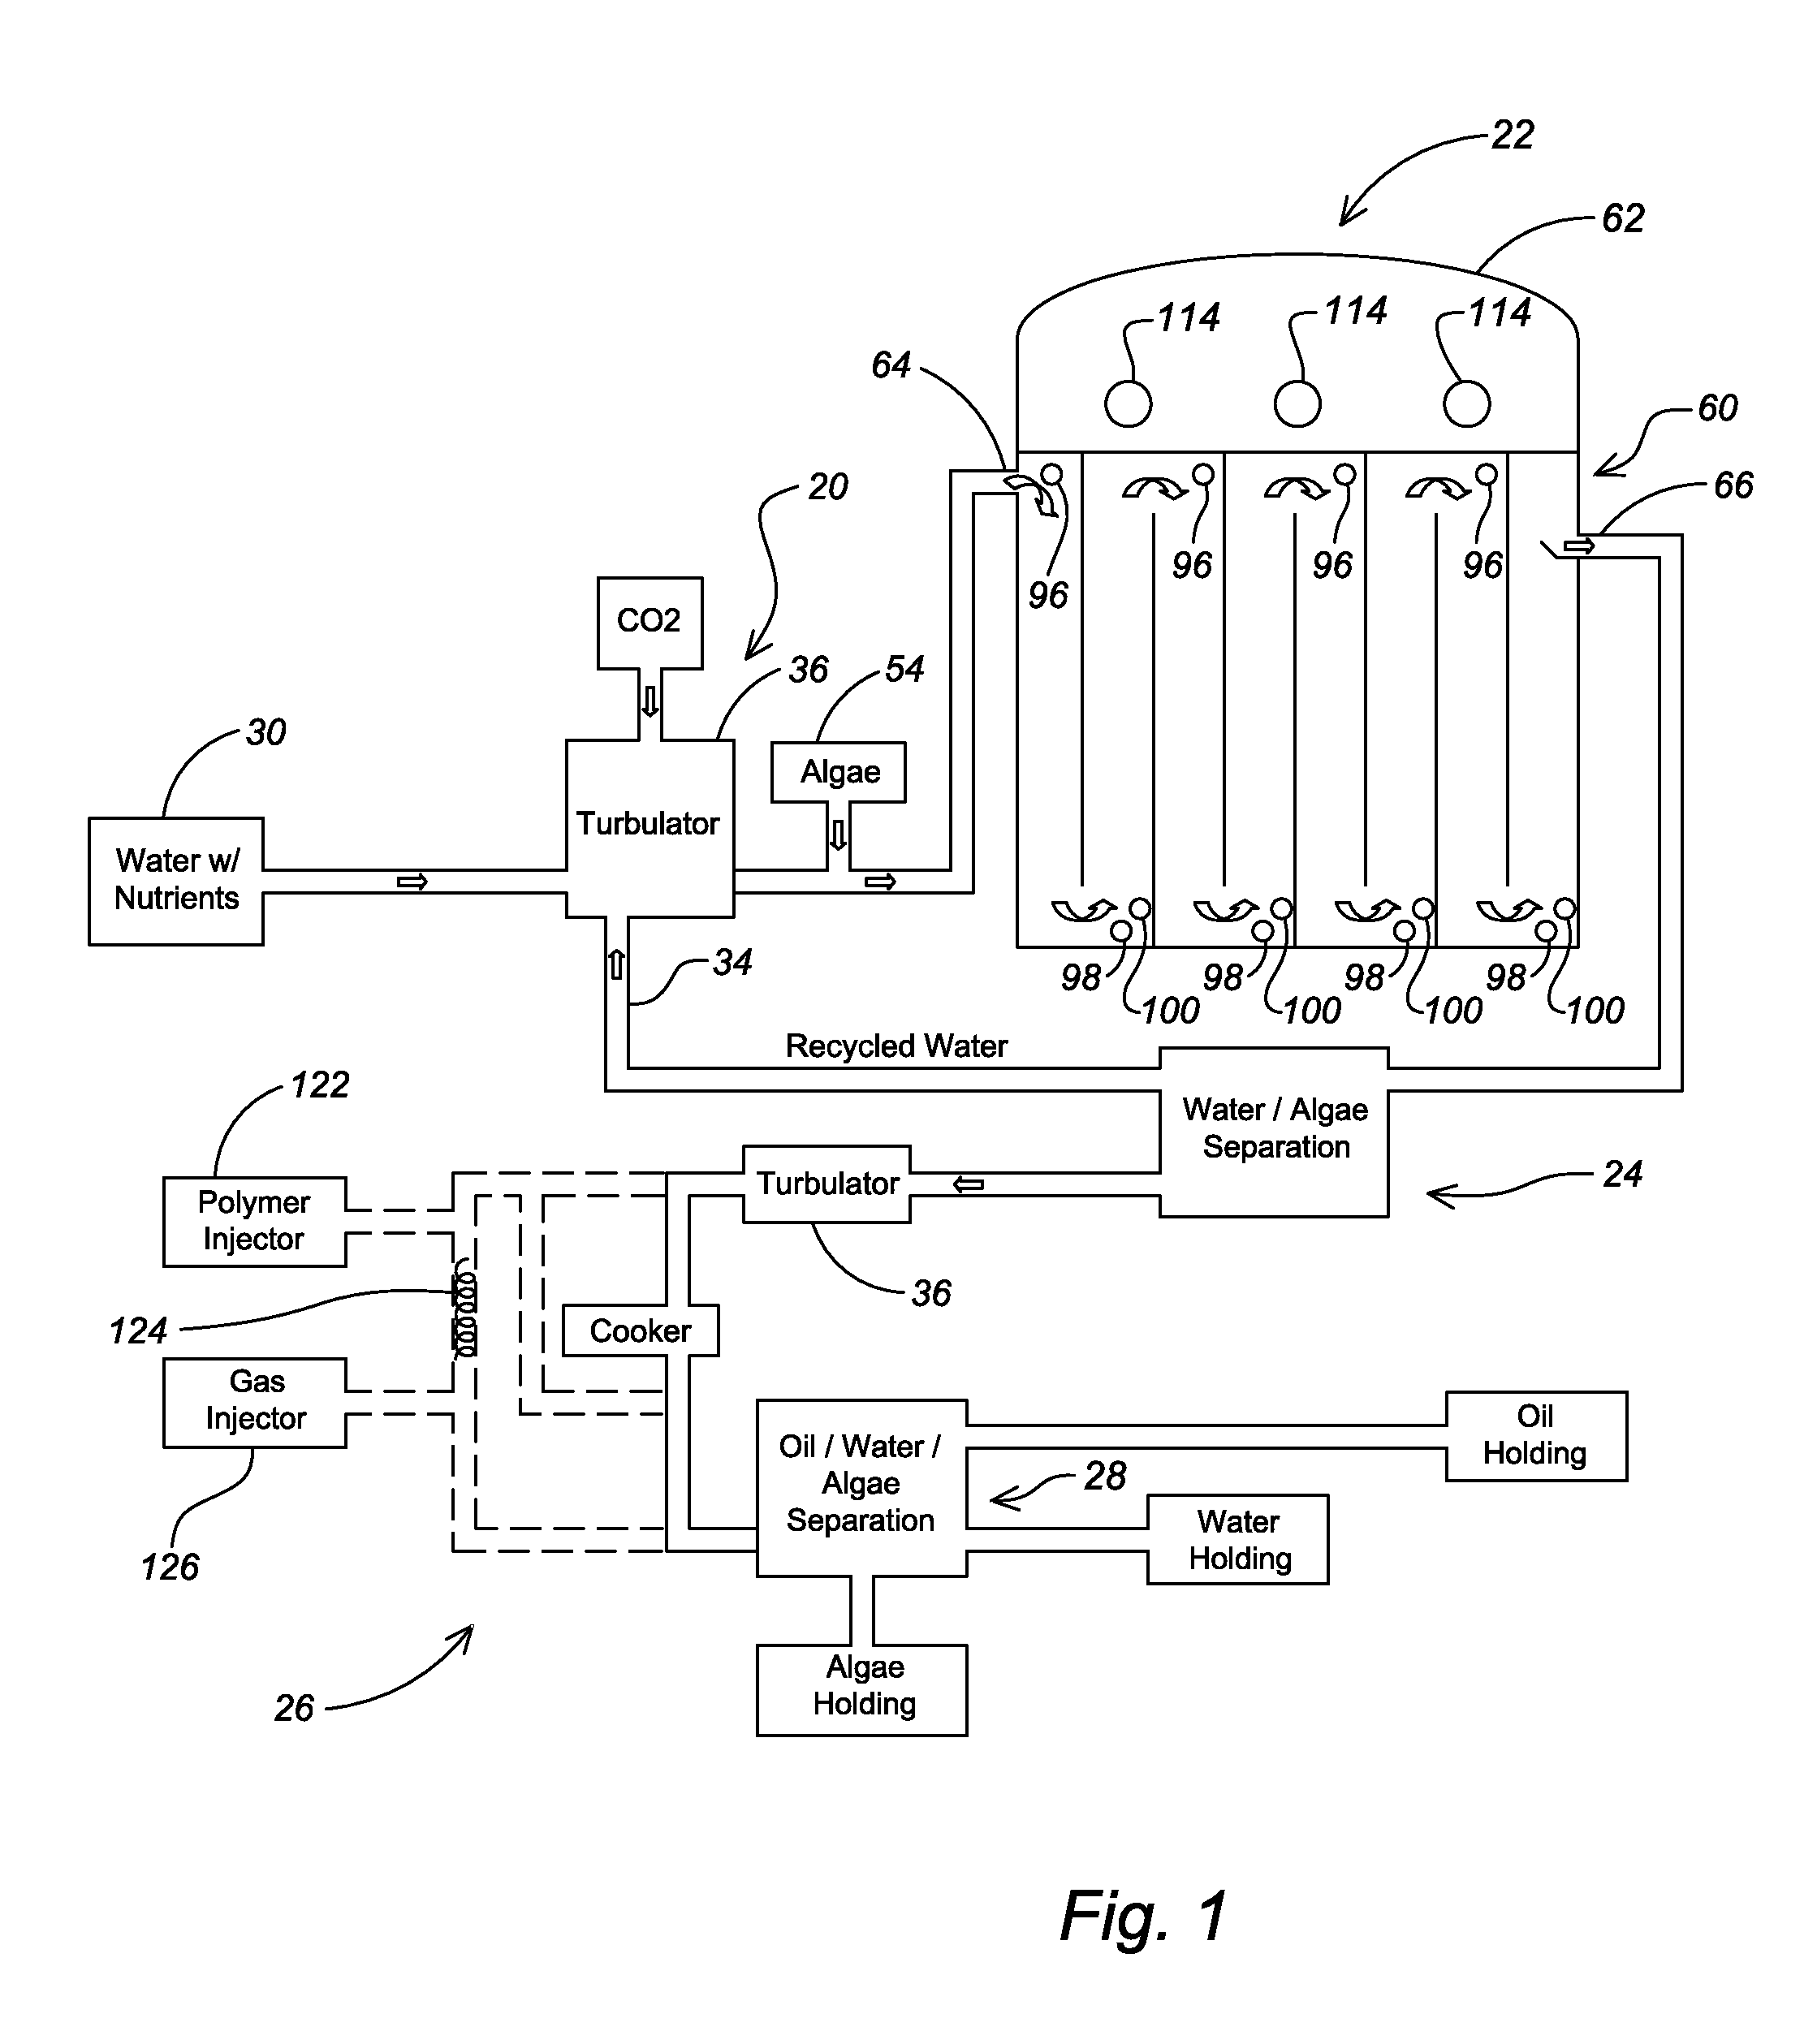 System for the production and harvesting of algae